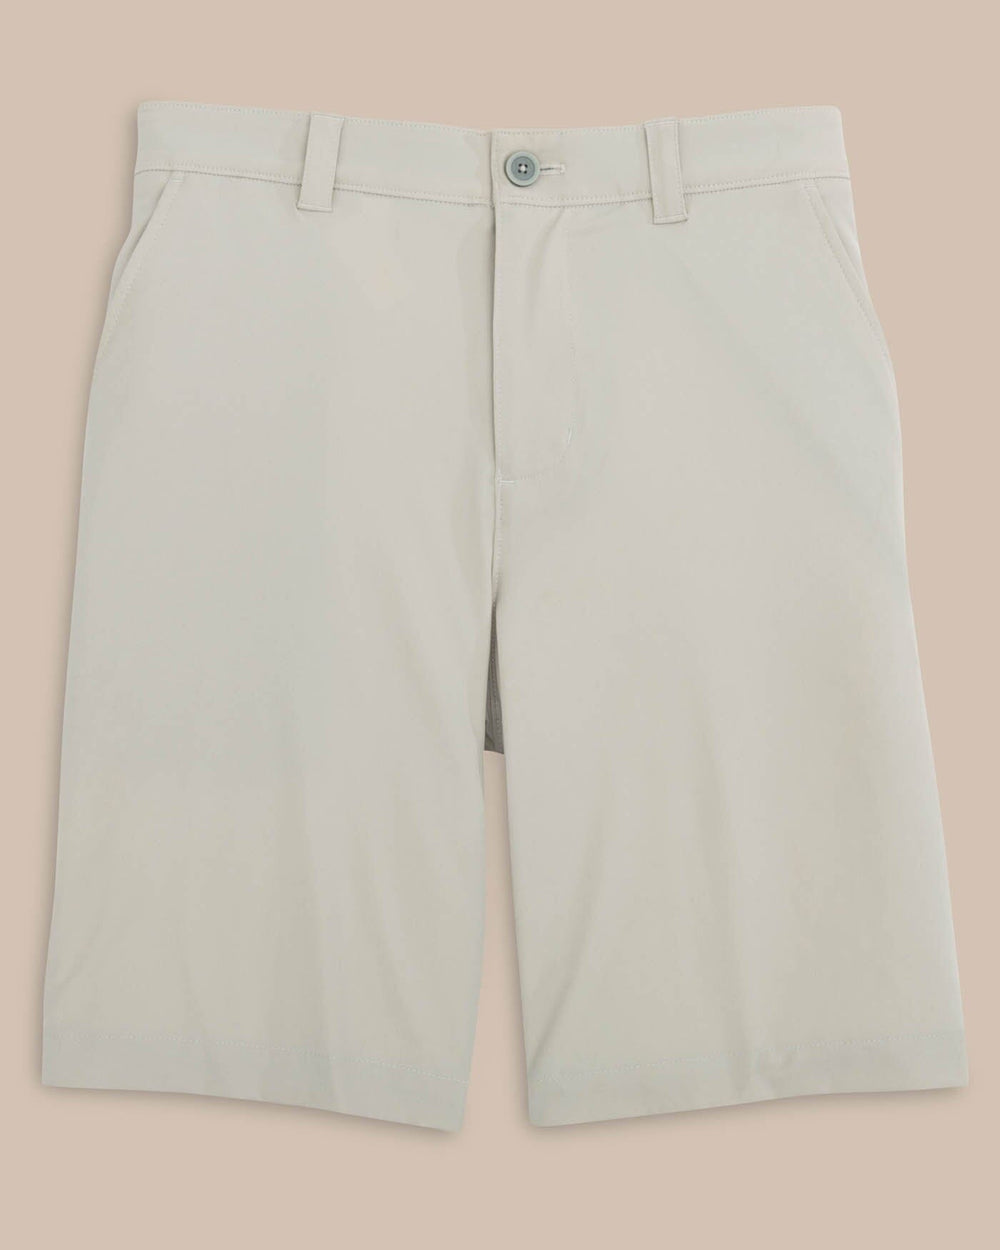 The front view of the Southern Tide brrr die 10 Short by Southern Tide - Stone